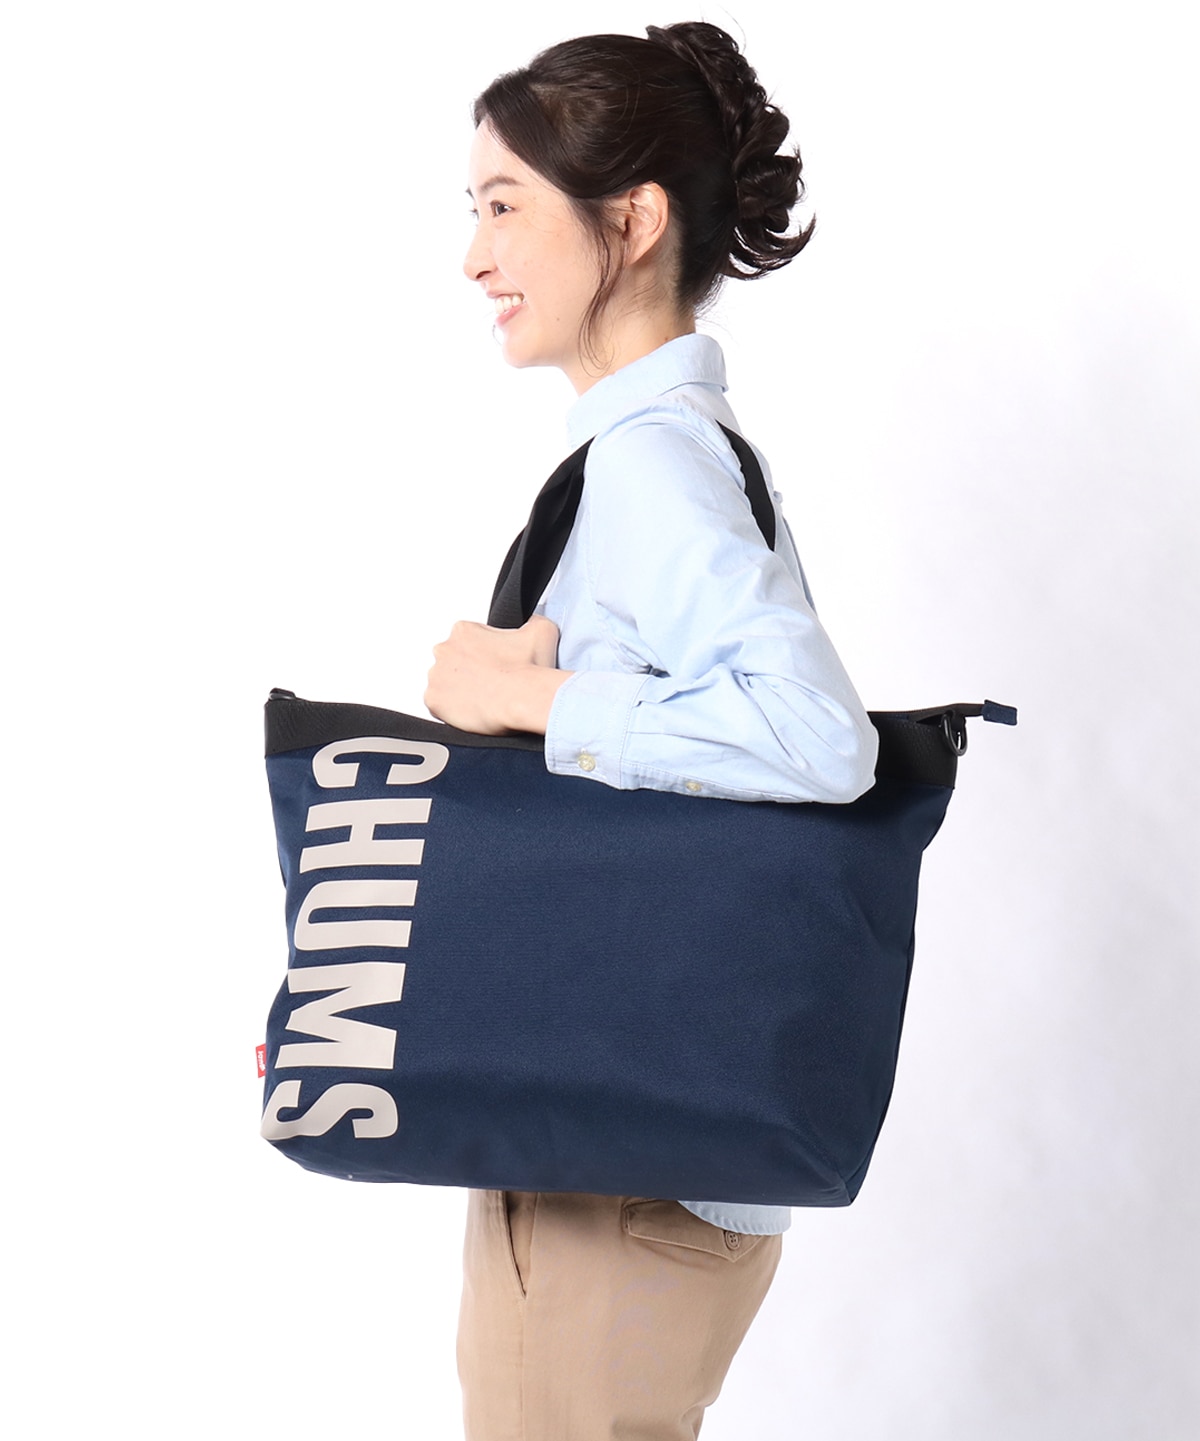 Recycle CHUMS Tote Bag/リサイクルチャムストートバッグ(トートバッグ